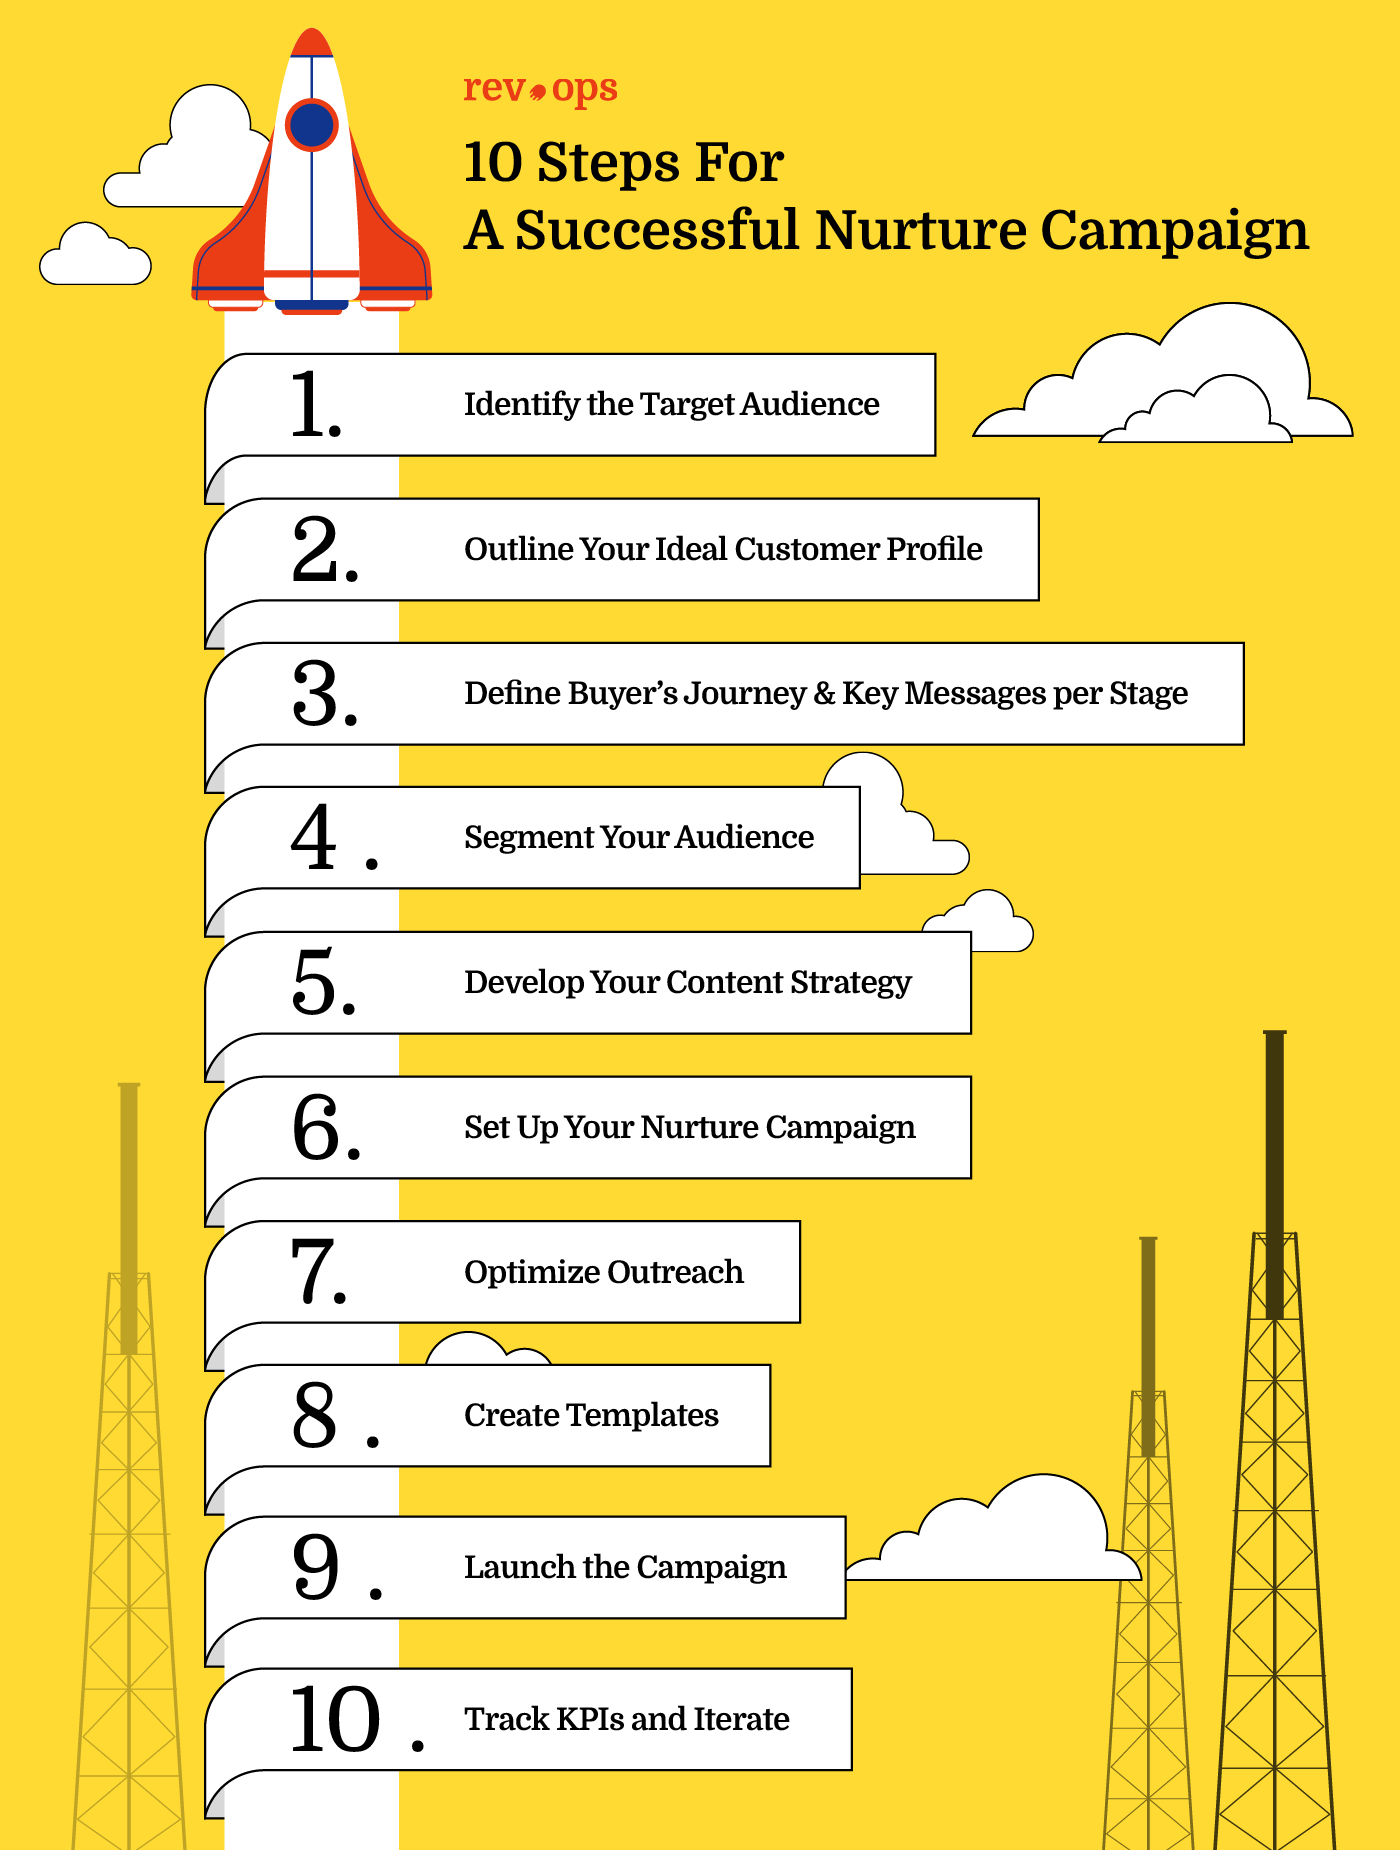 10 Steps for a Successful Nurture Campaign:1. Identify Target Audience2. Outline Your Ideal Customer Profile3. Define Buyer's Journey and Key Messages4. Segment Your Audience5. Develop Your Content Strategy6. Set Up Your Nurture Campaign7. Optimize Outreach8. Create Templates9. Launch the Campaign1-. Track KPIs and Iterate